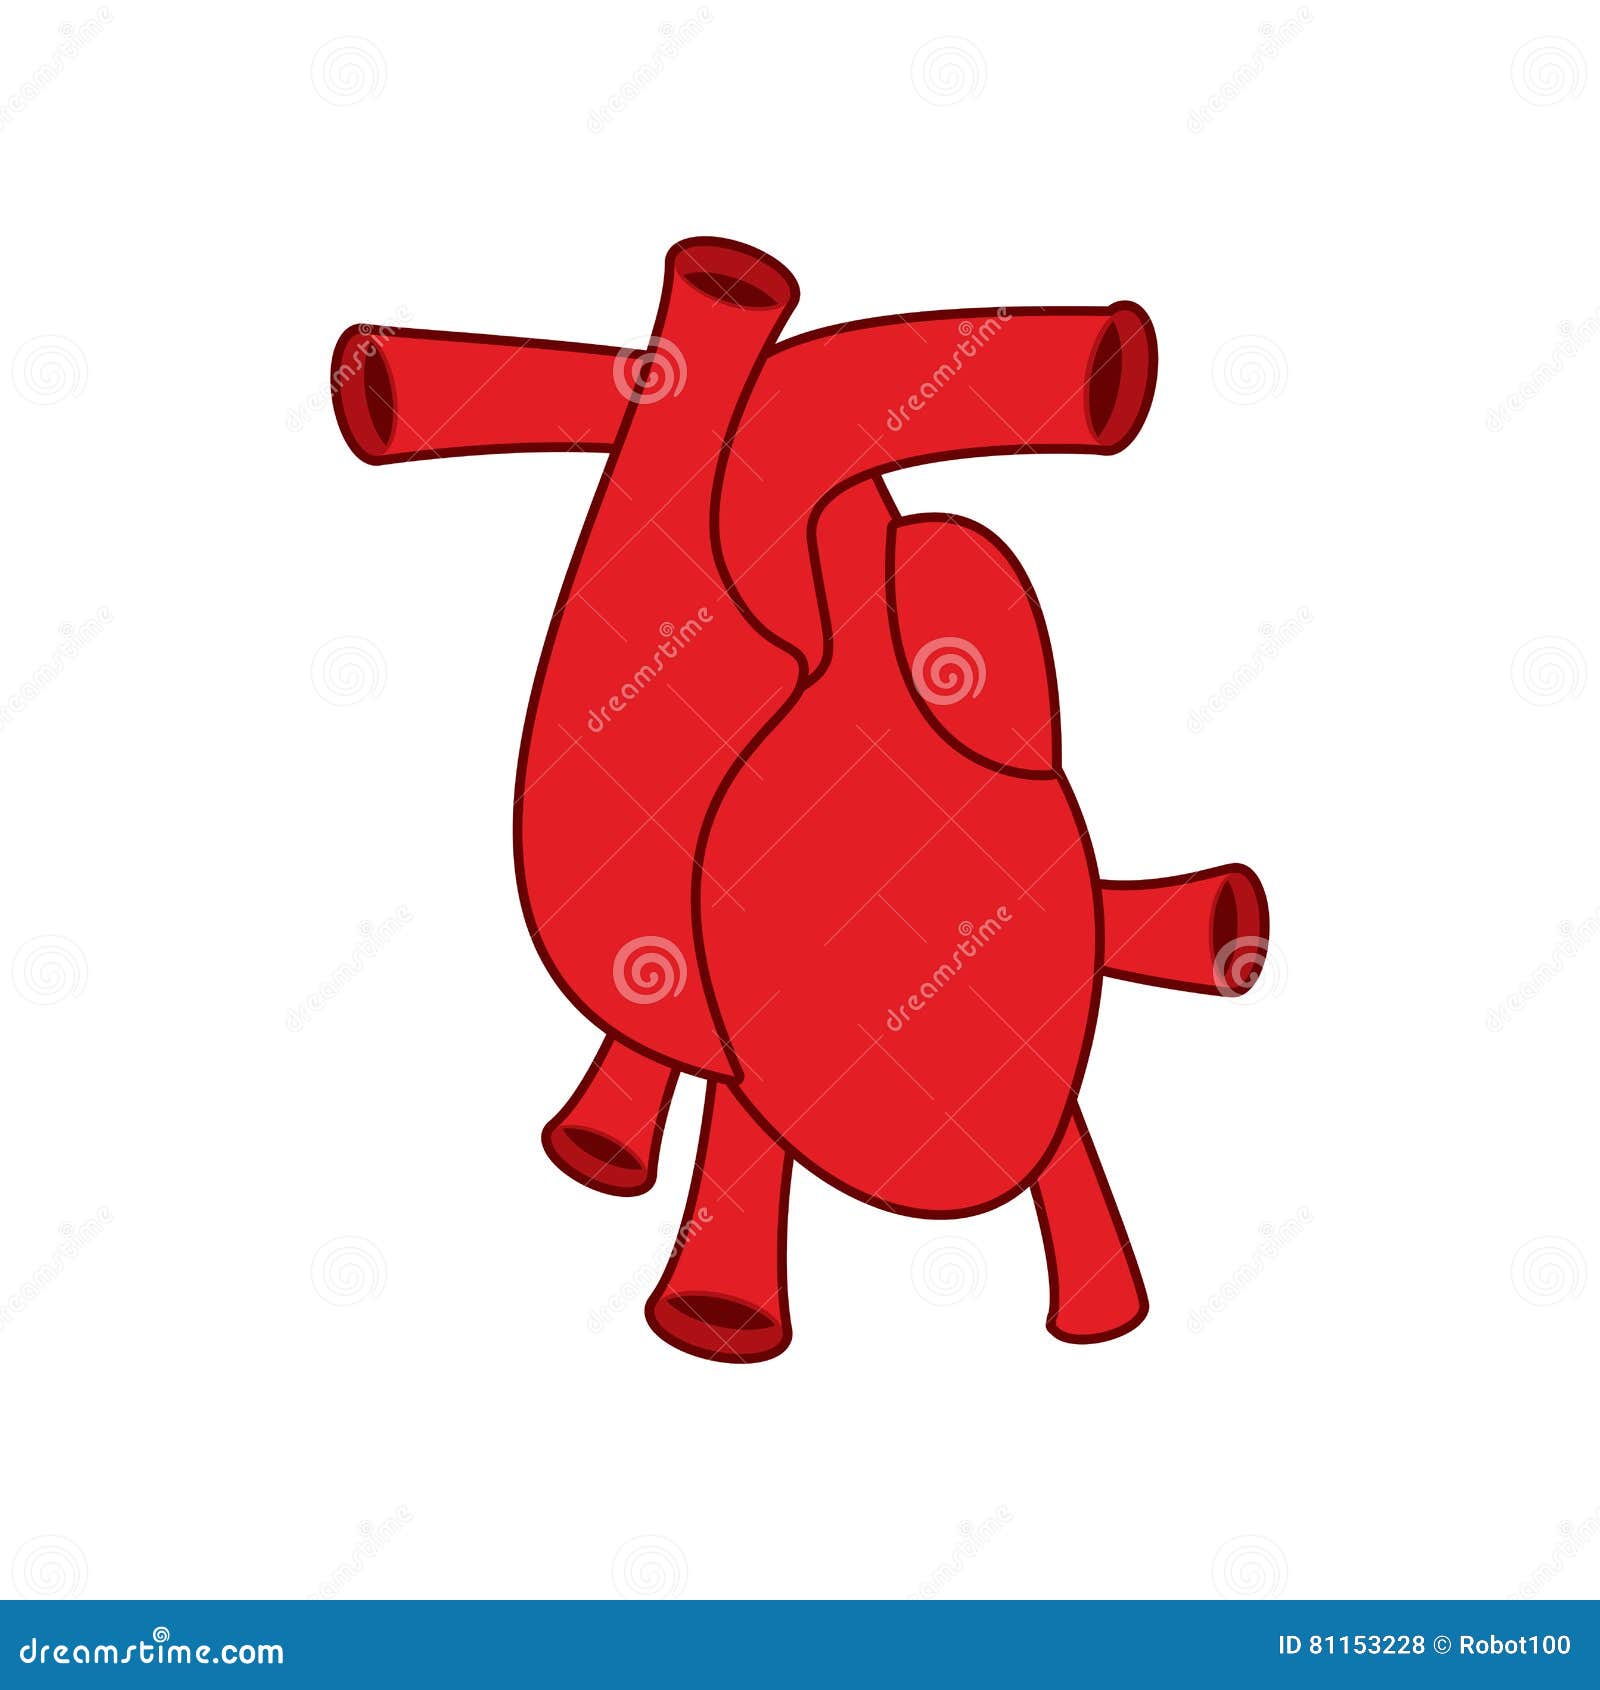 heart anatomy icon atria and ventricles. veins and arteries.